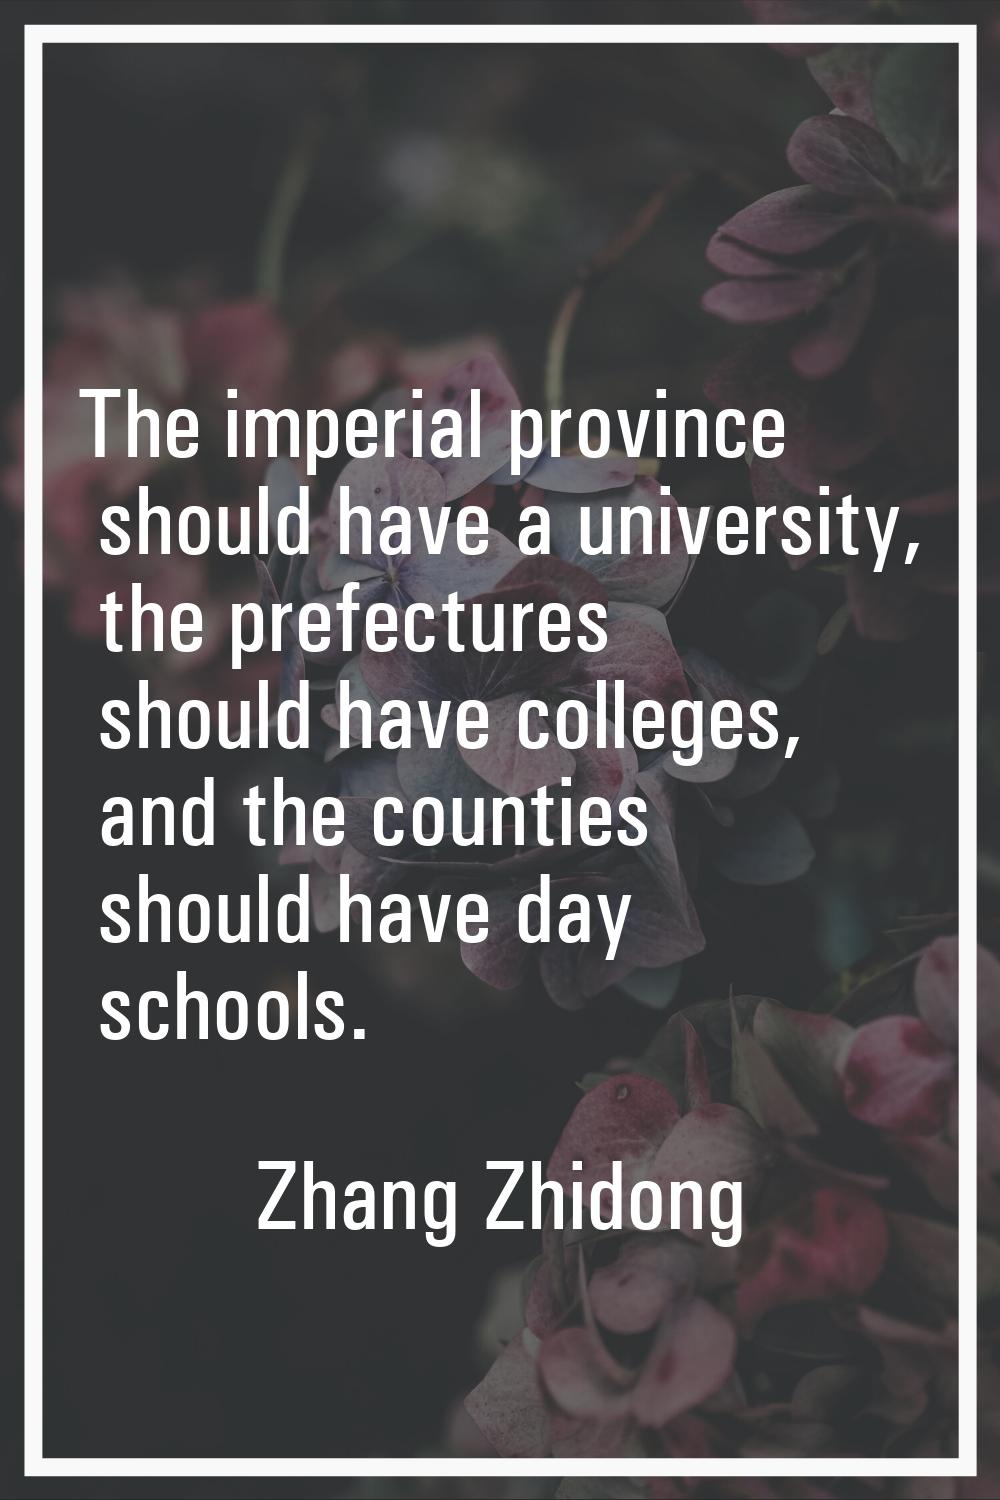 The imperial province should have a university, the prefectures should have colleges, and the count